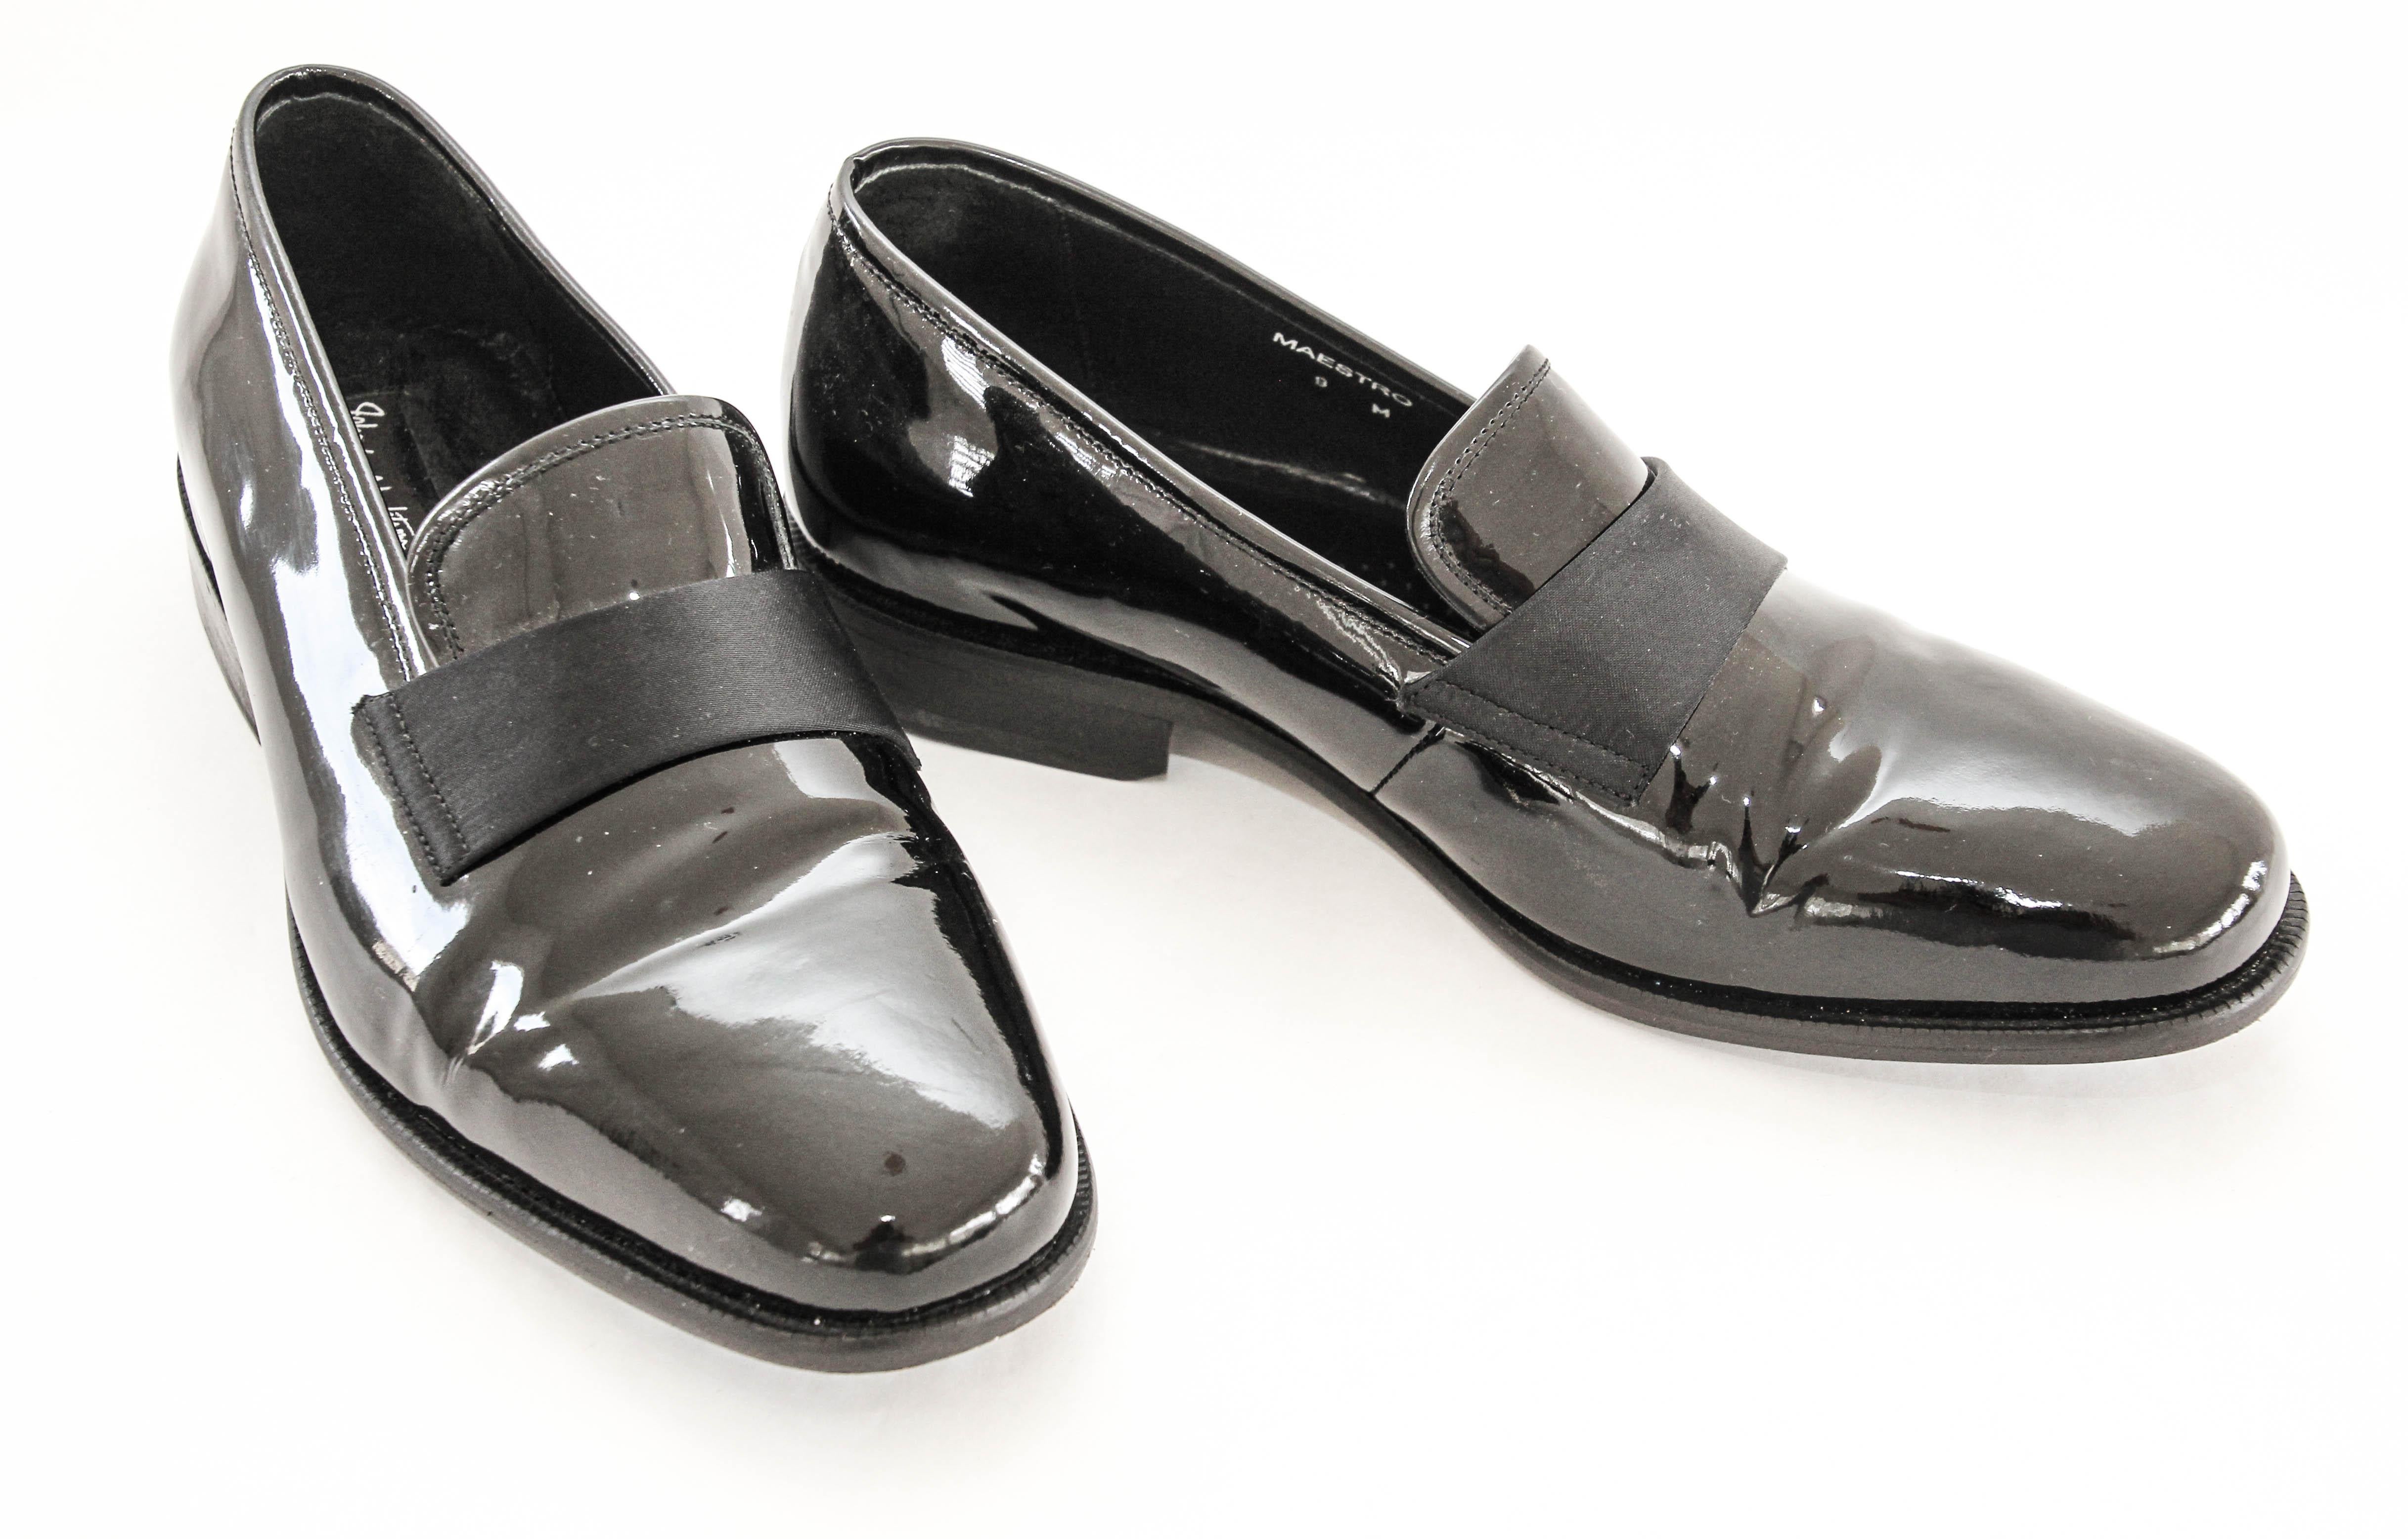 John Varvatos presents the Maestro Men's Slip-On Dress Loafers in Black Patent Leather, size 9 M.
Crafted by JOHN VARVATOS, these black Maestro loafers embody timeless elegance. 
The lightweight and comfortable slip-on design complements any suit,